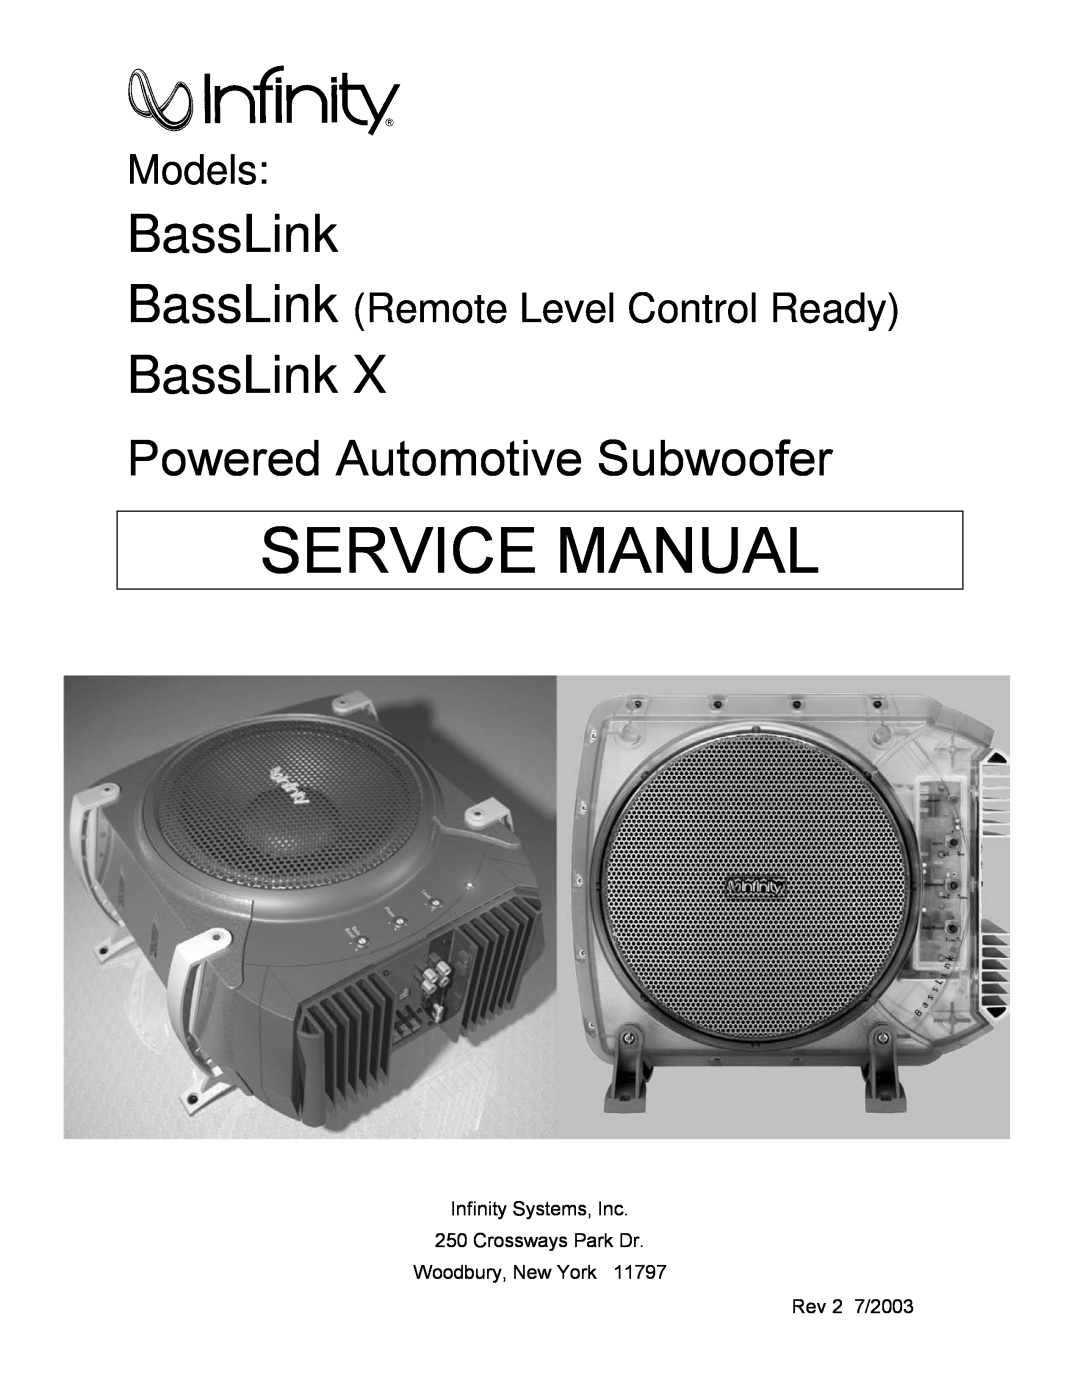 Infinity Bass Link service manual Models, BassLink Remote Level Control Ready, Powered Automotive Subwoofer 